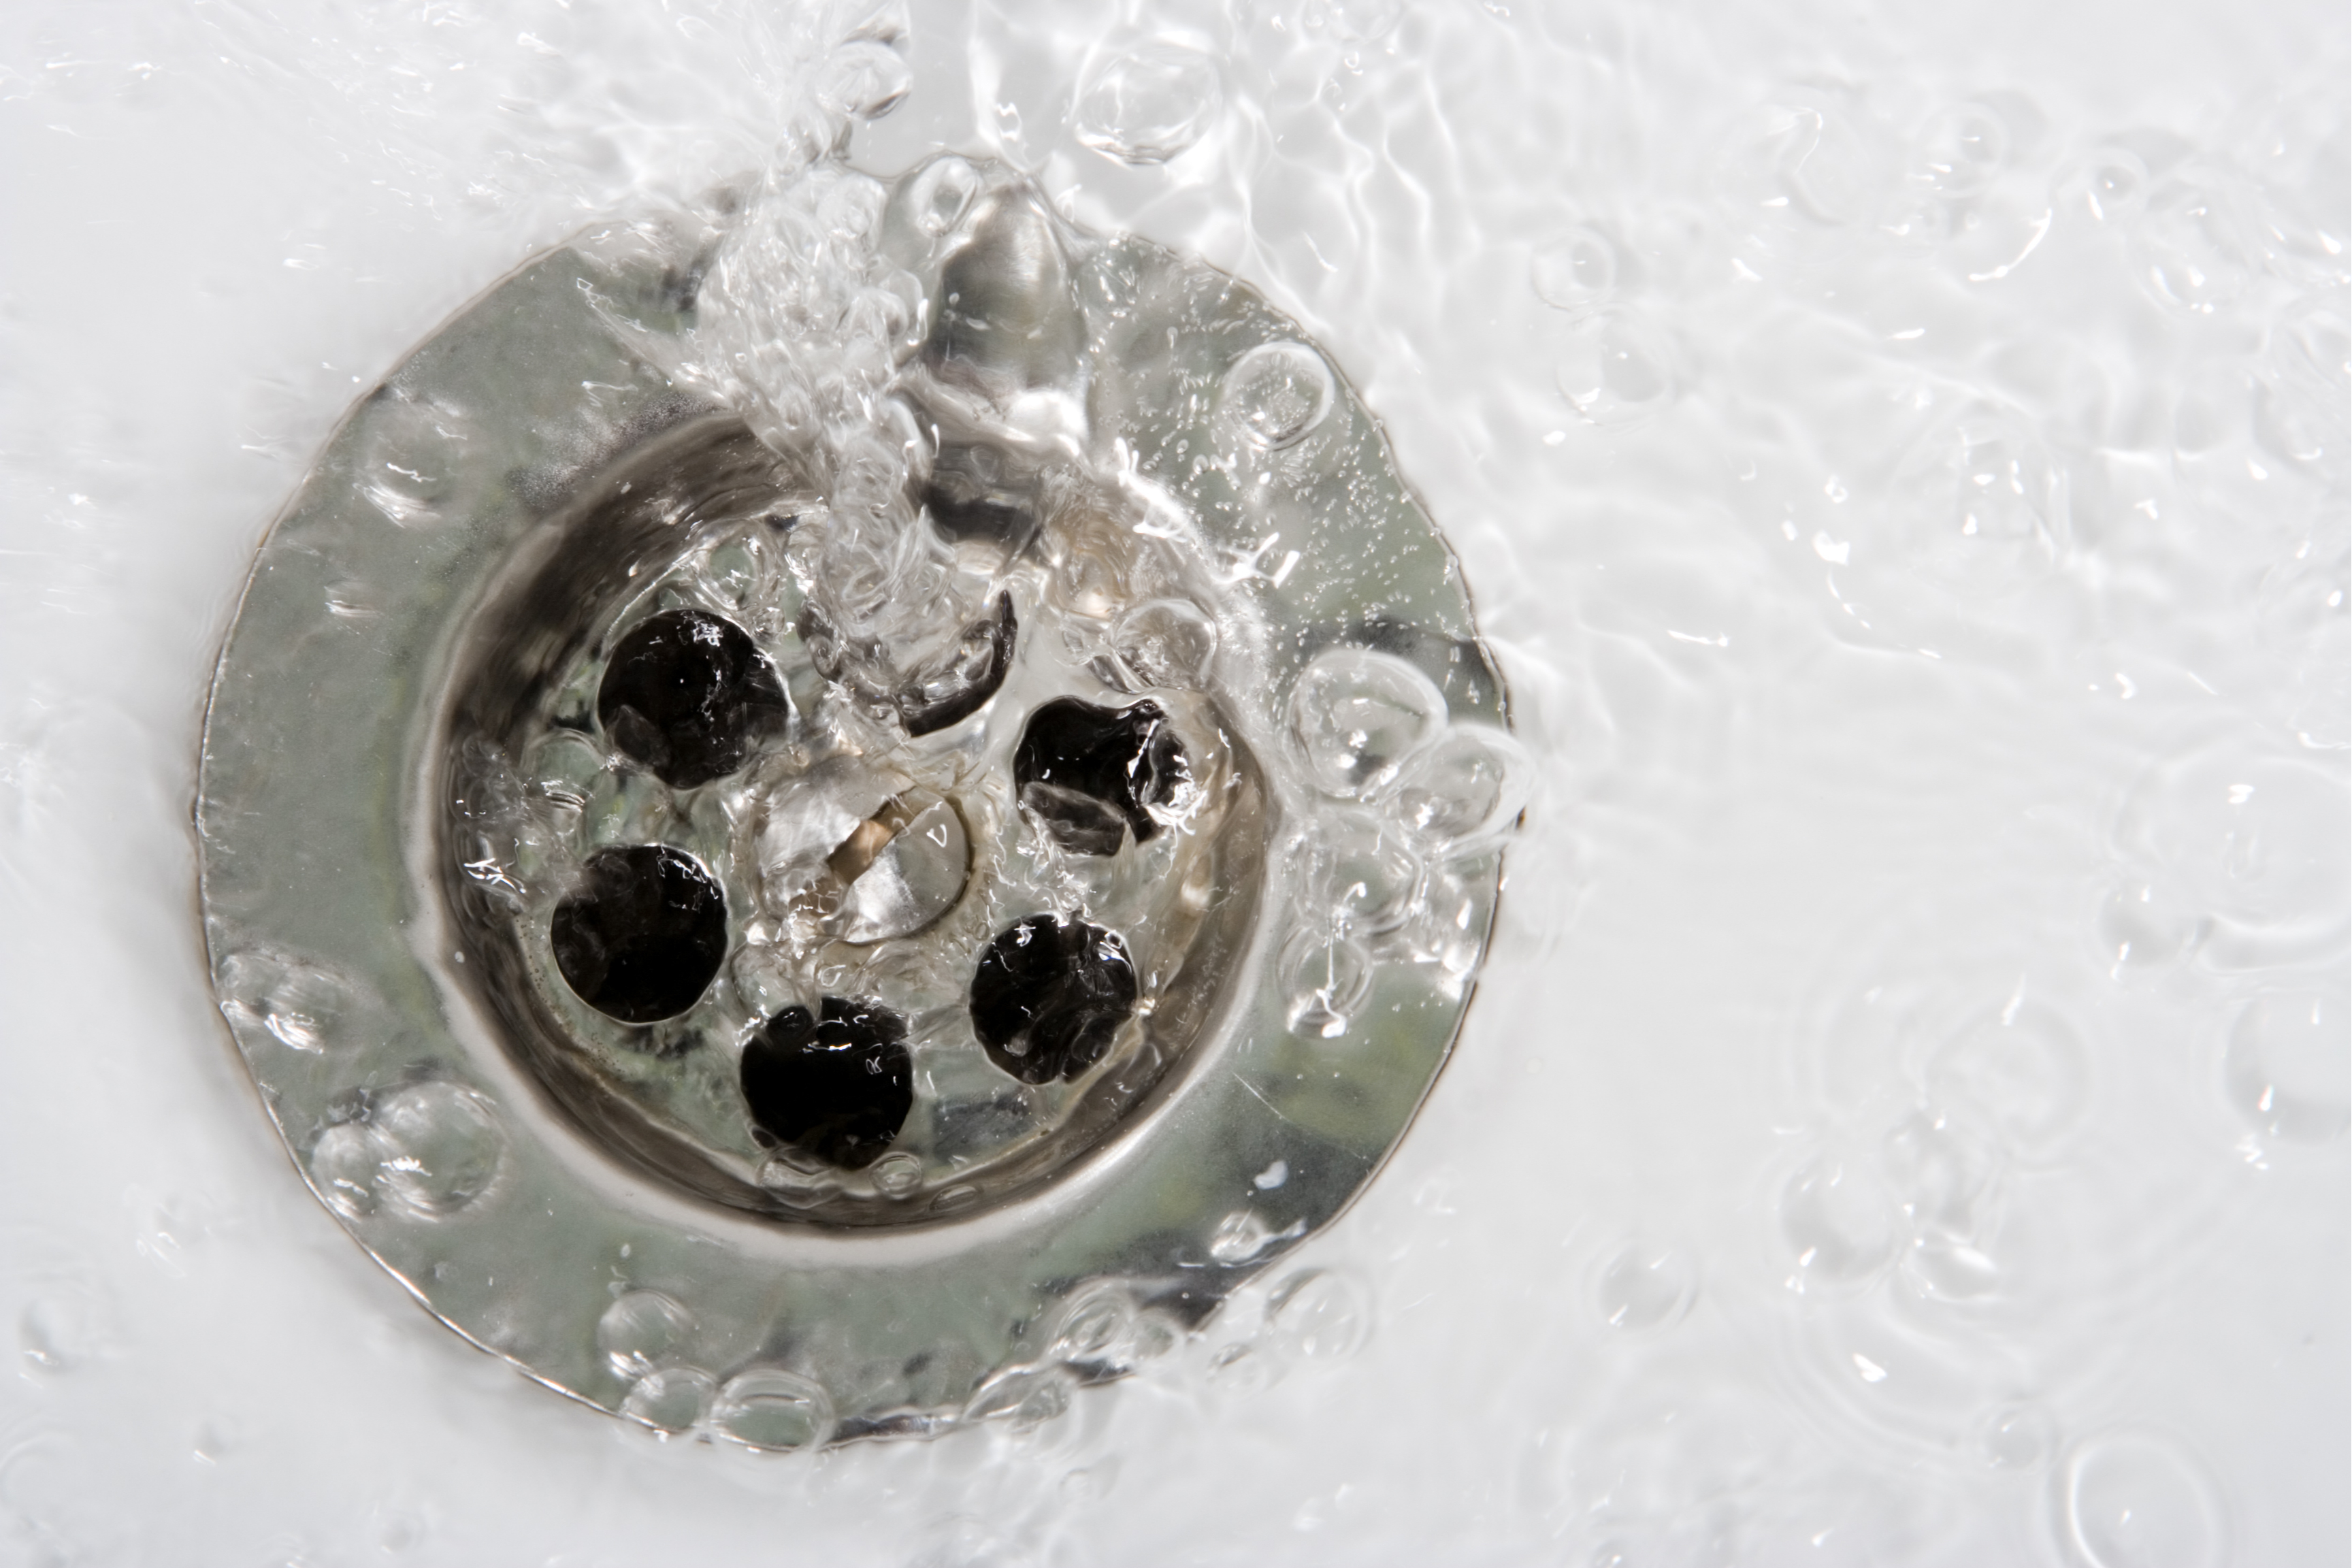 Bathroom Drain Cleaning, Cottleville